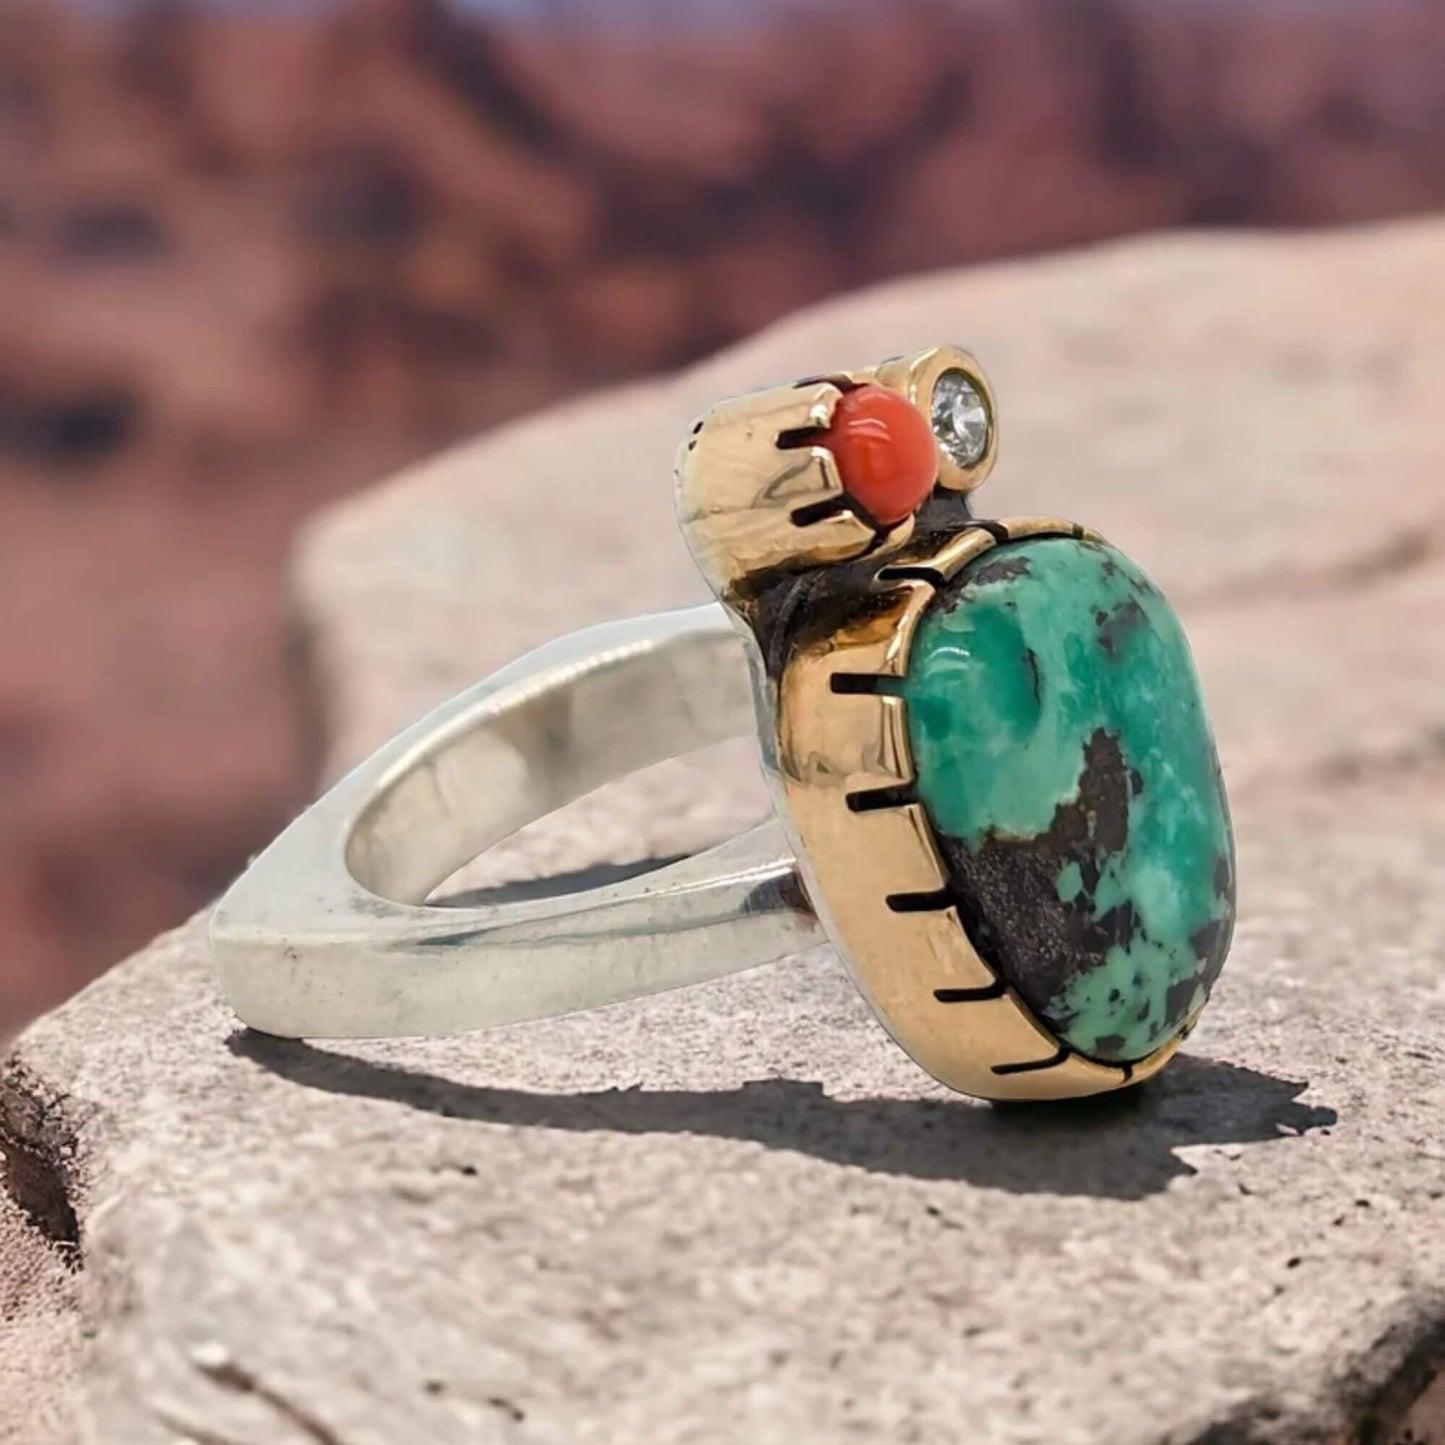 The Desert Rose | One of a Kind 14k Yellow Gold and Sterling Silver Diamond and Poseidon Variscite Ring - Size 7